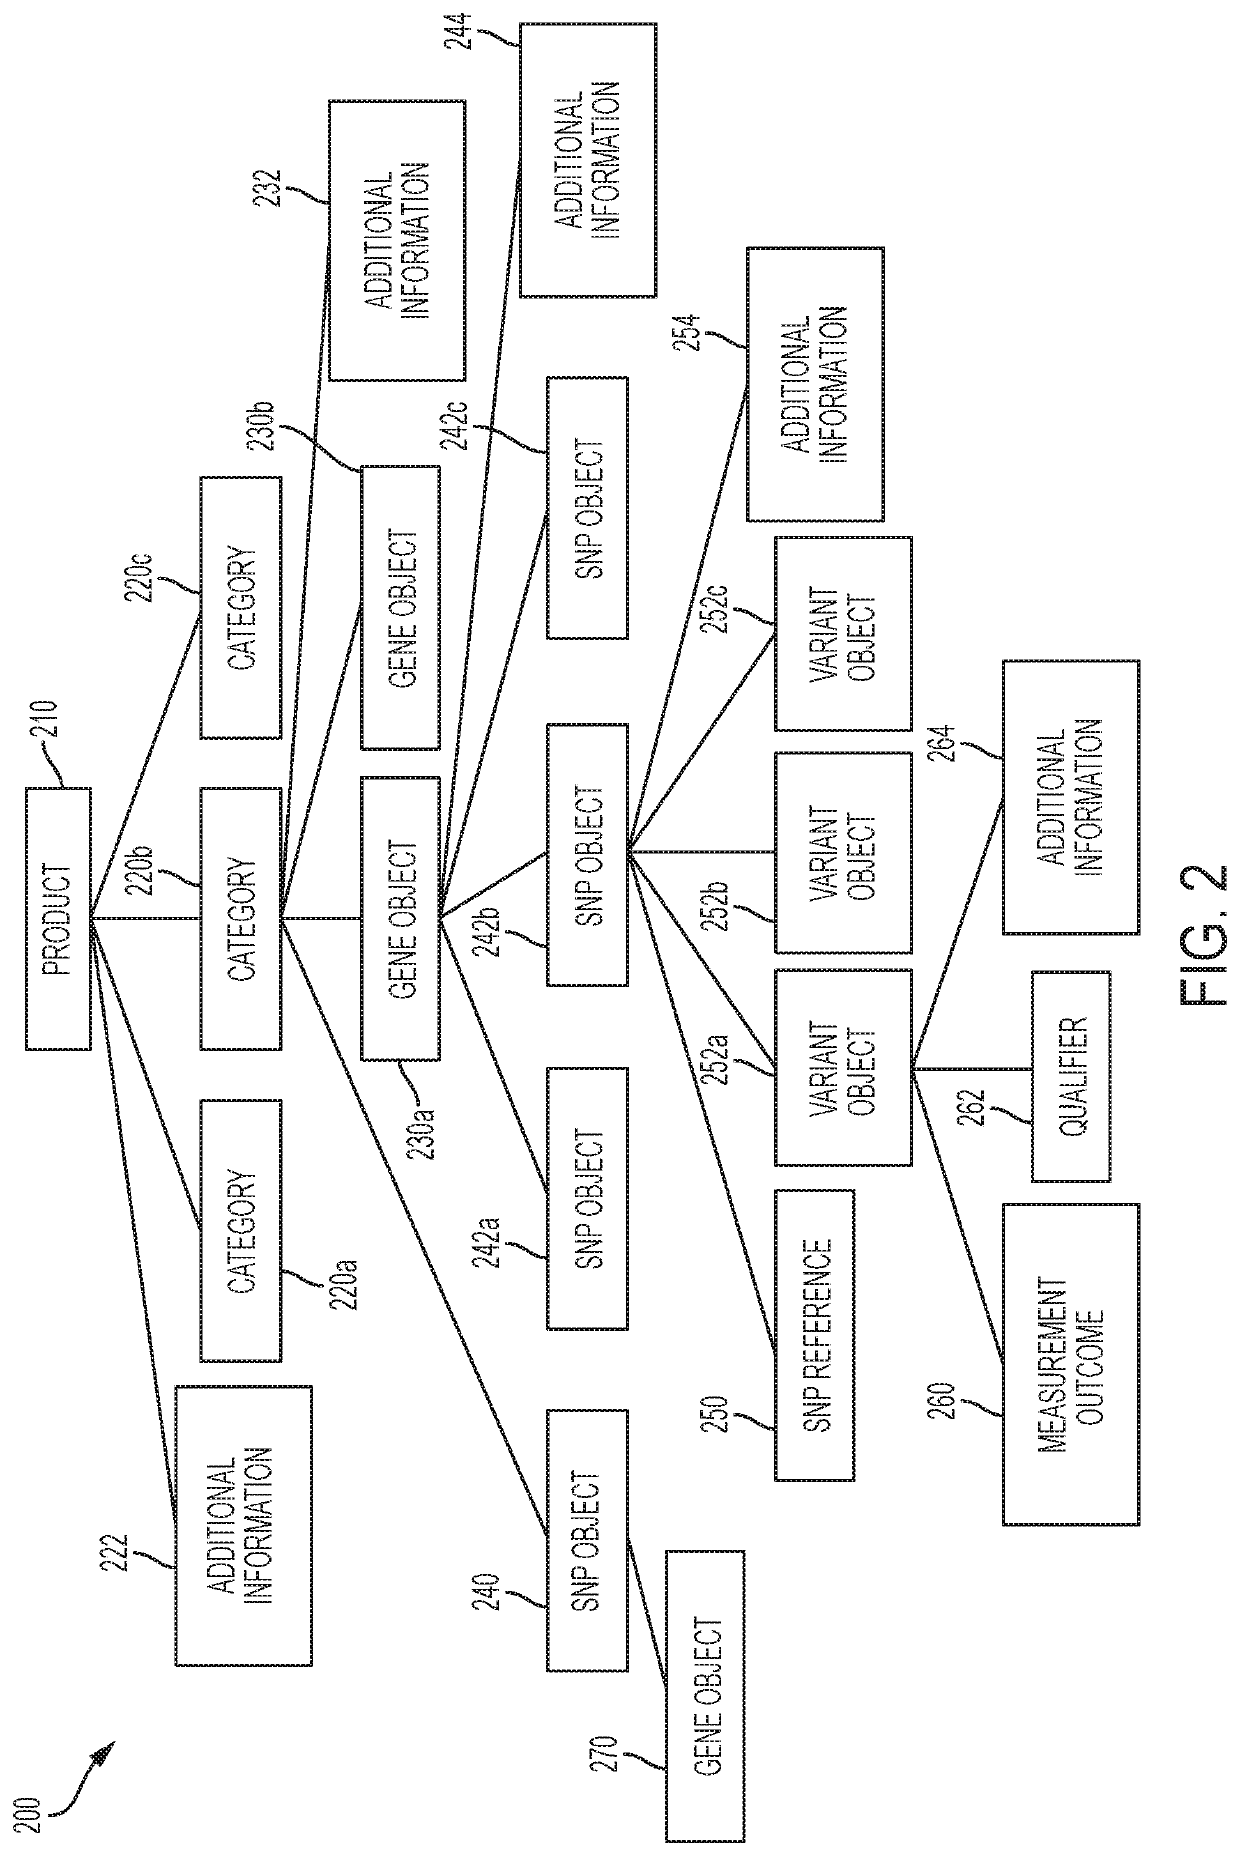 Systems and methods for filtering social media interactions and online content based on personal genetic profiles